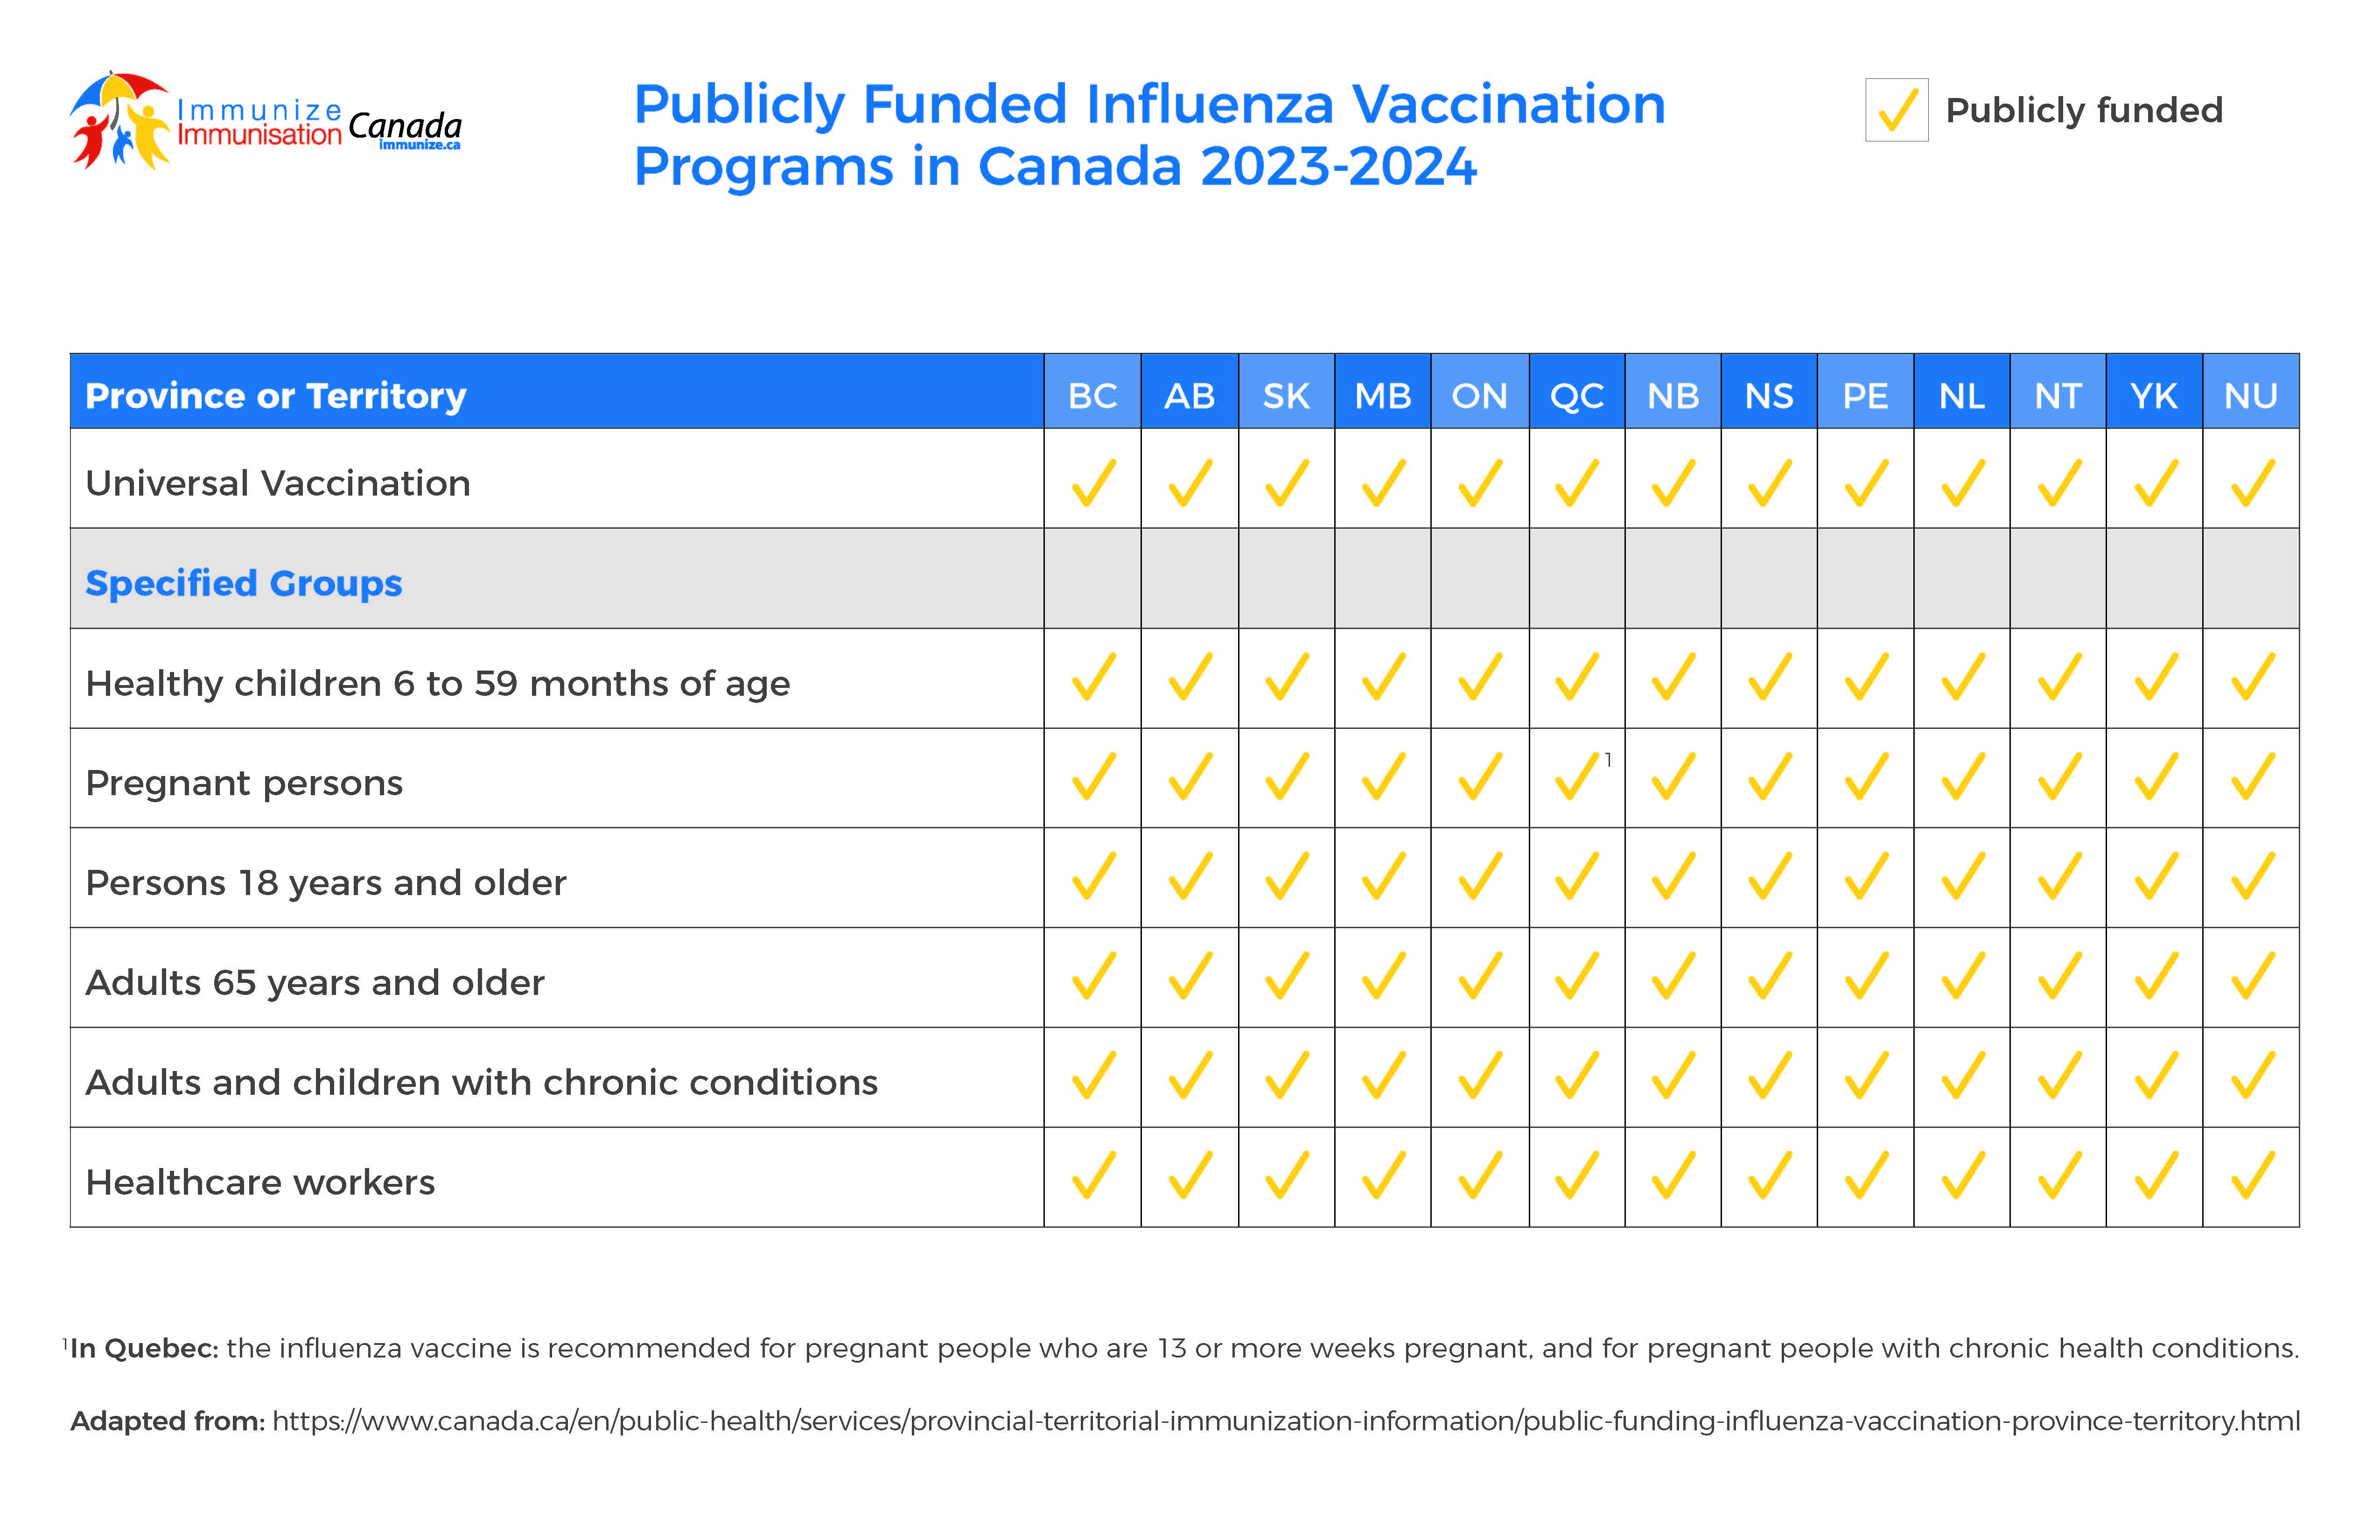 Publicly Funded Influenza Vaccination Programs in Canada 2023-2024